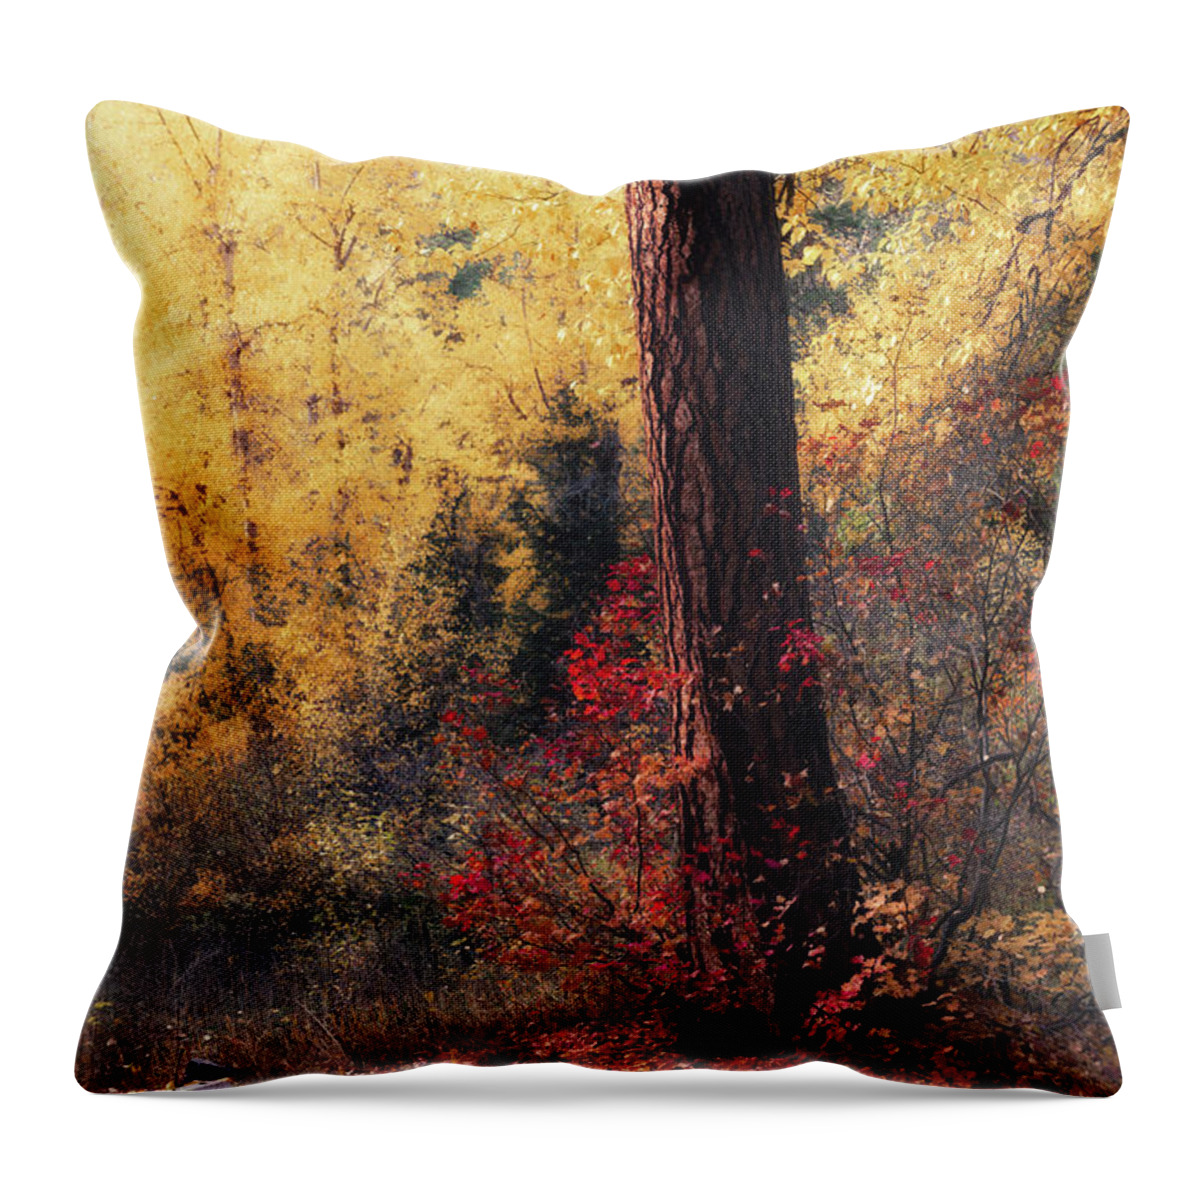 Autumn Throw Pillow featuring the photograph Autumn Impressions by Jason Roberts